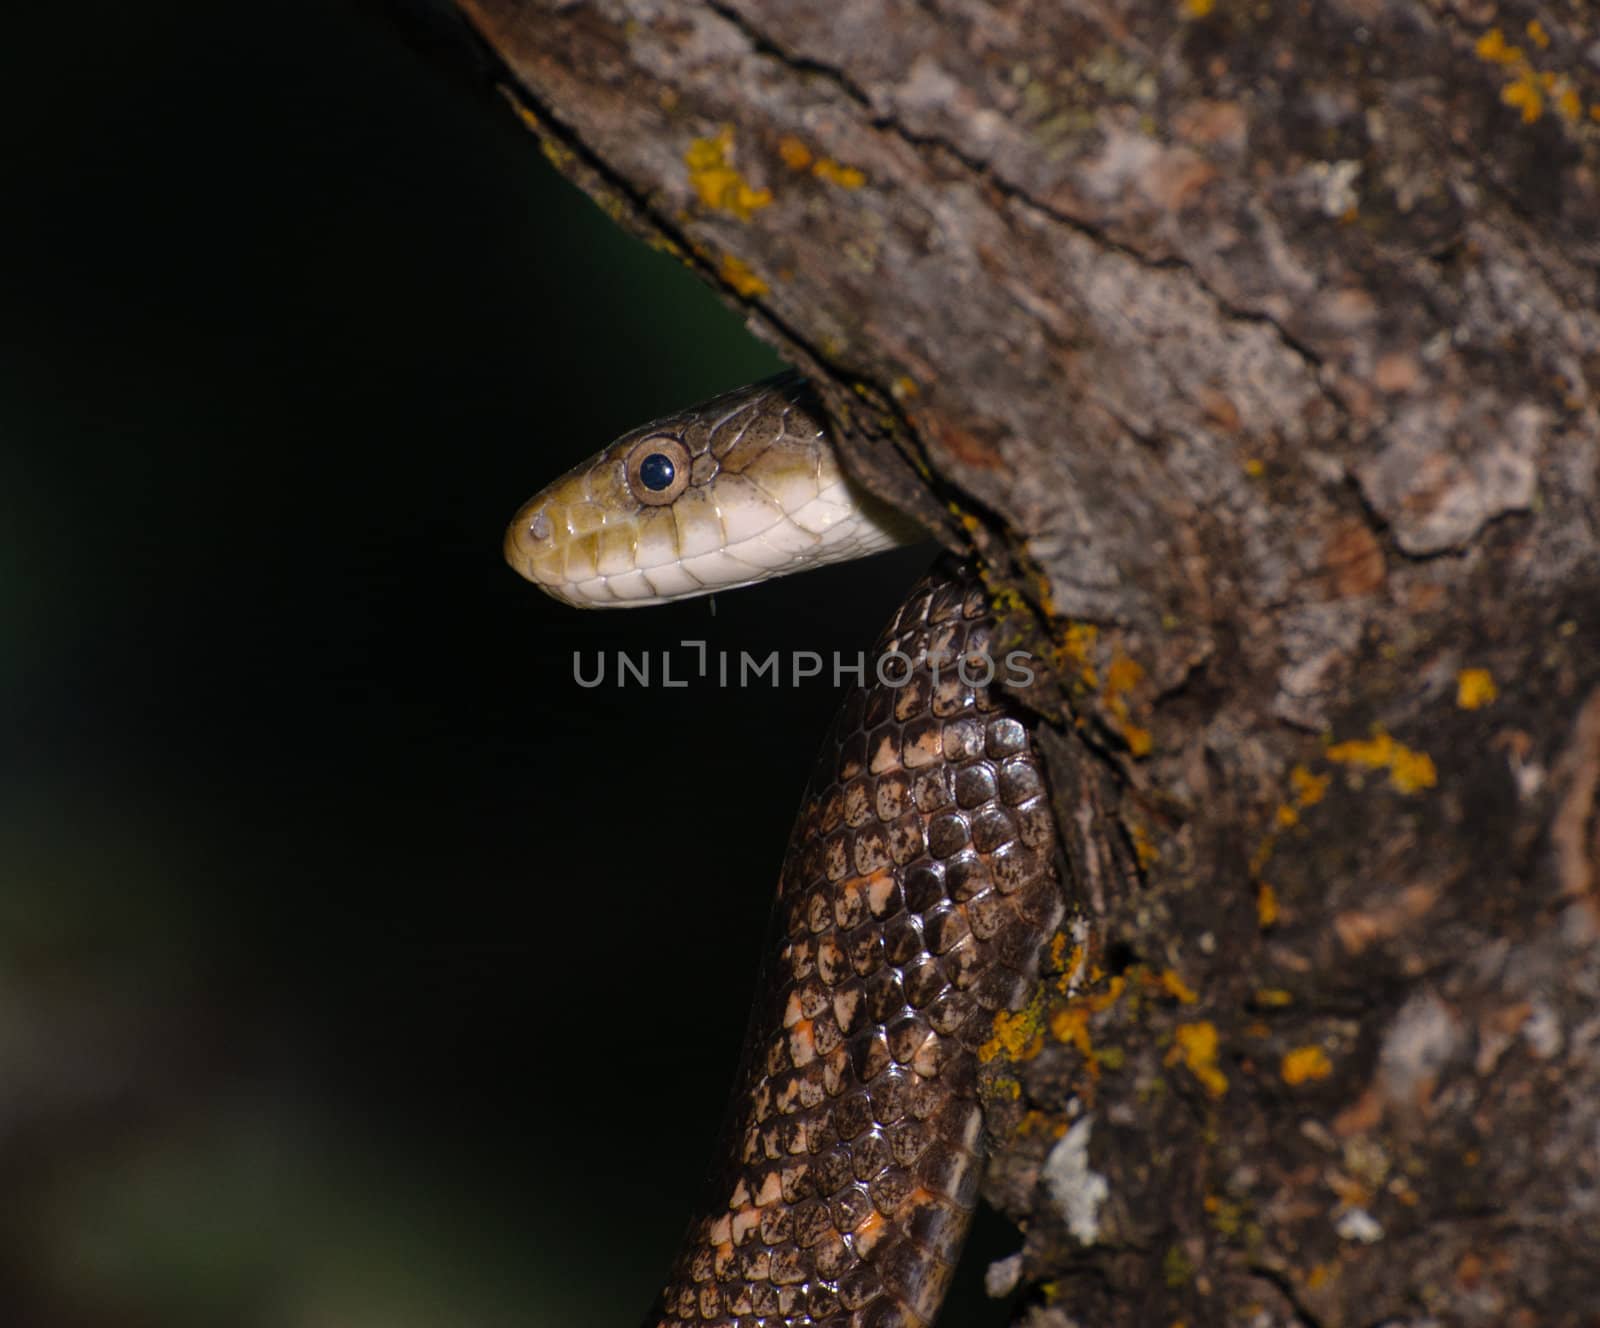 A snake in a tree shot at night in the forest